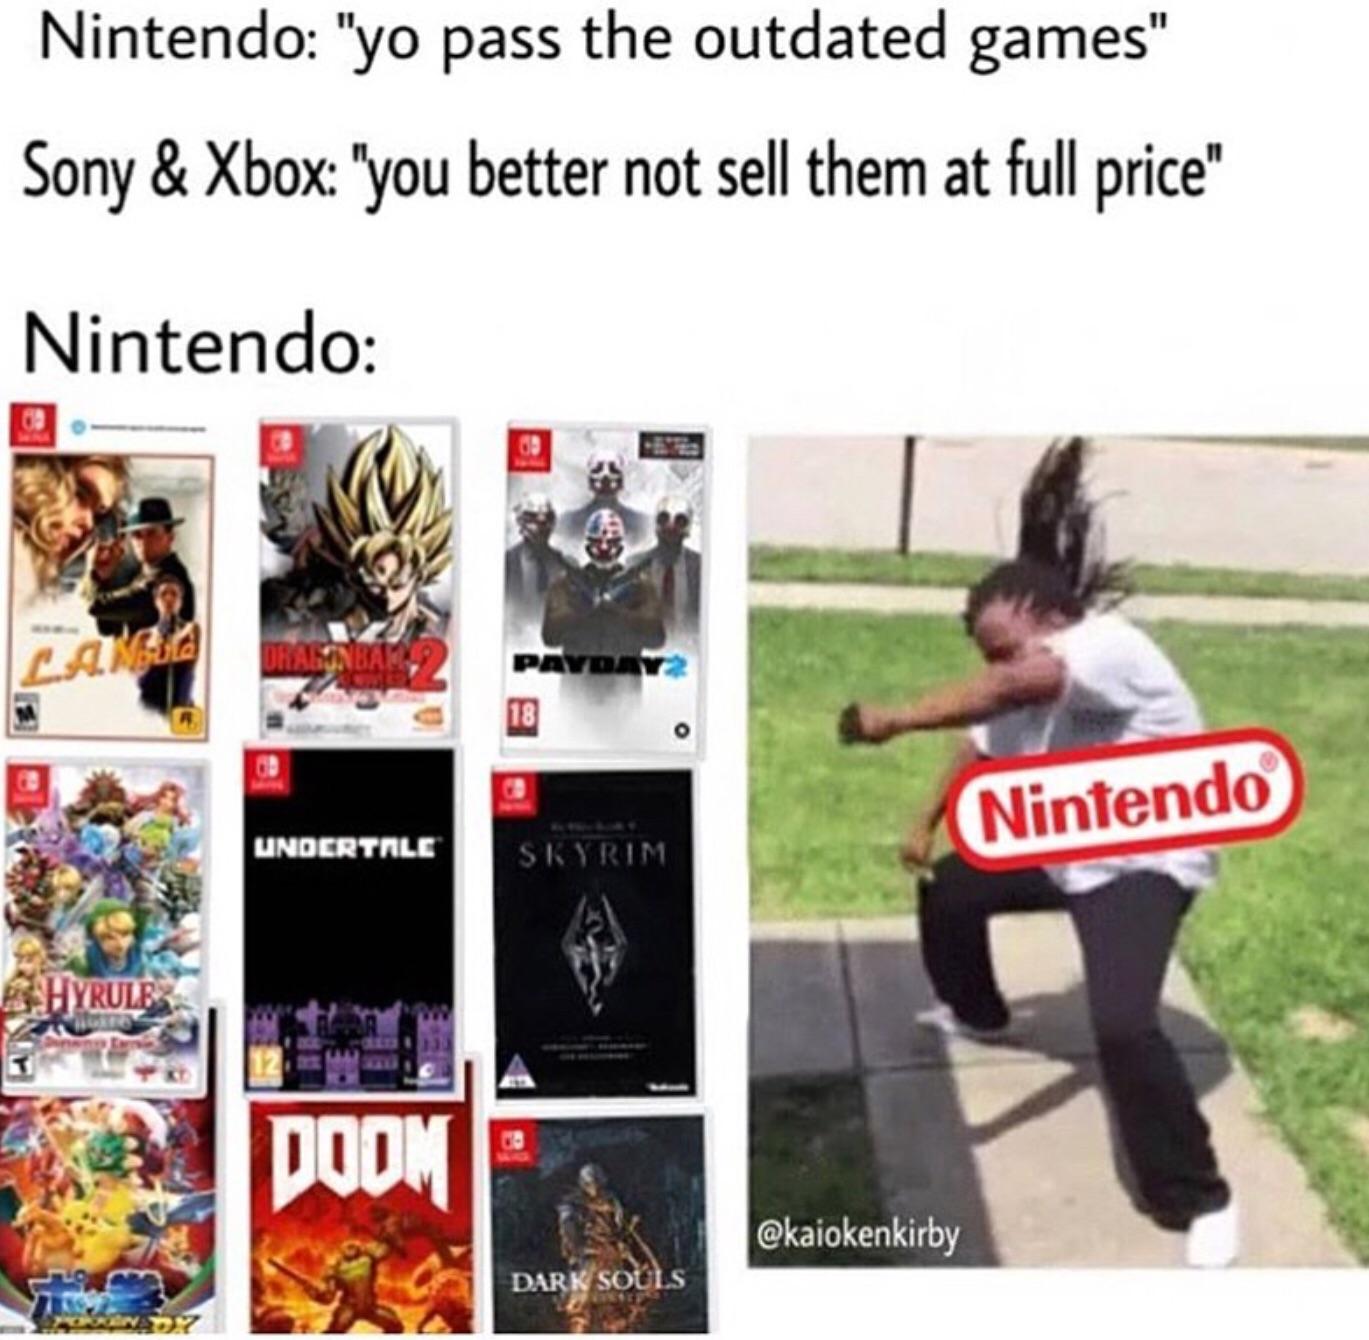 nintendo is overrated - Nintendo "yo pass the outdated games" Sony & Xbox "you better not sell them at full price" S Nintendo Pa Nintendo Undertale Skyrim Bhyrule Dark Souls